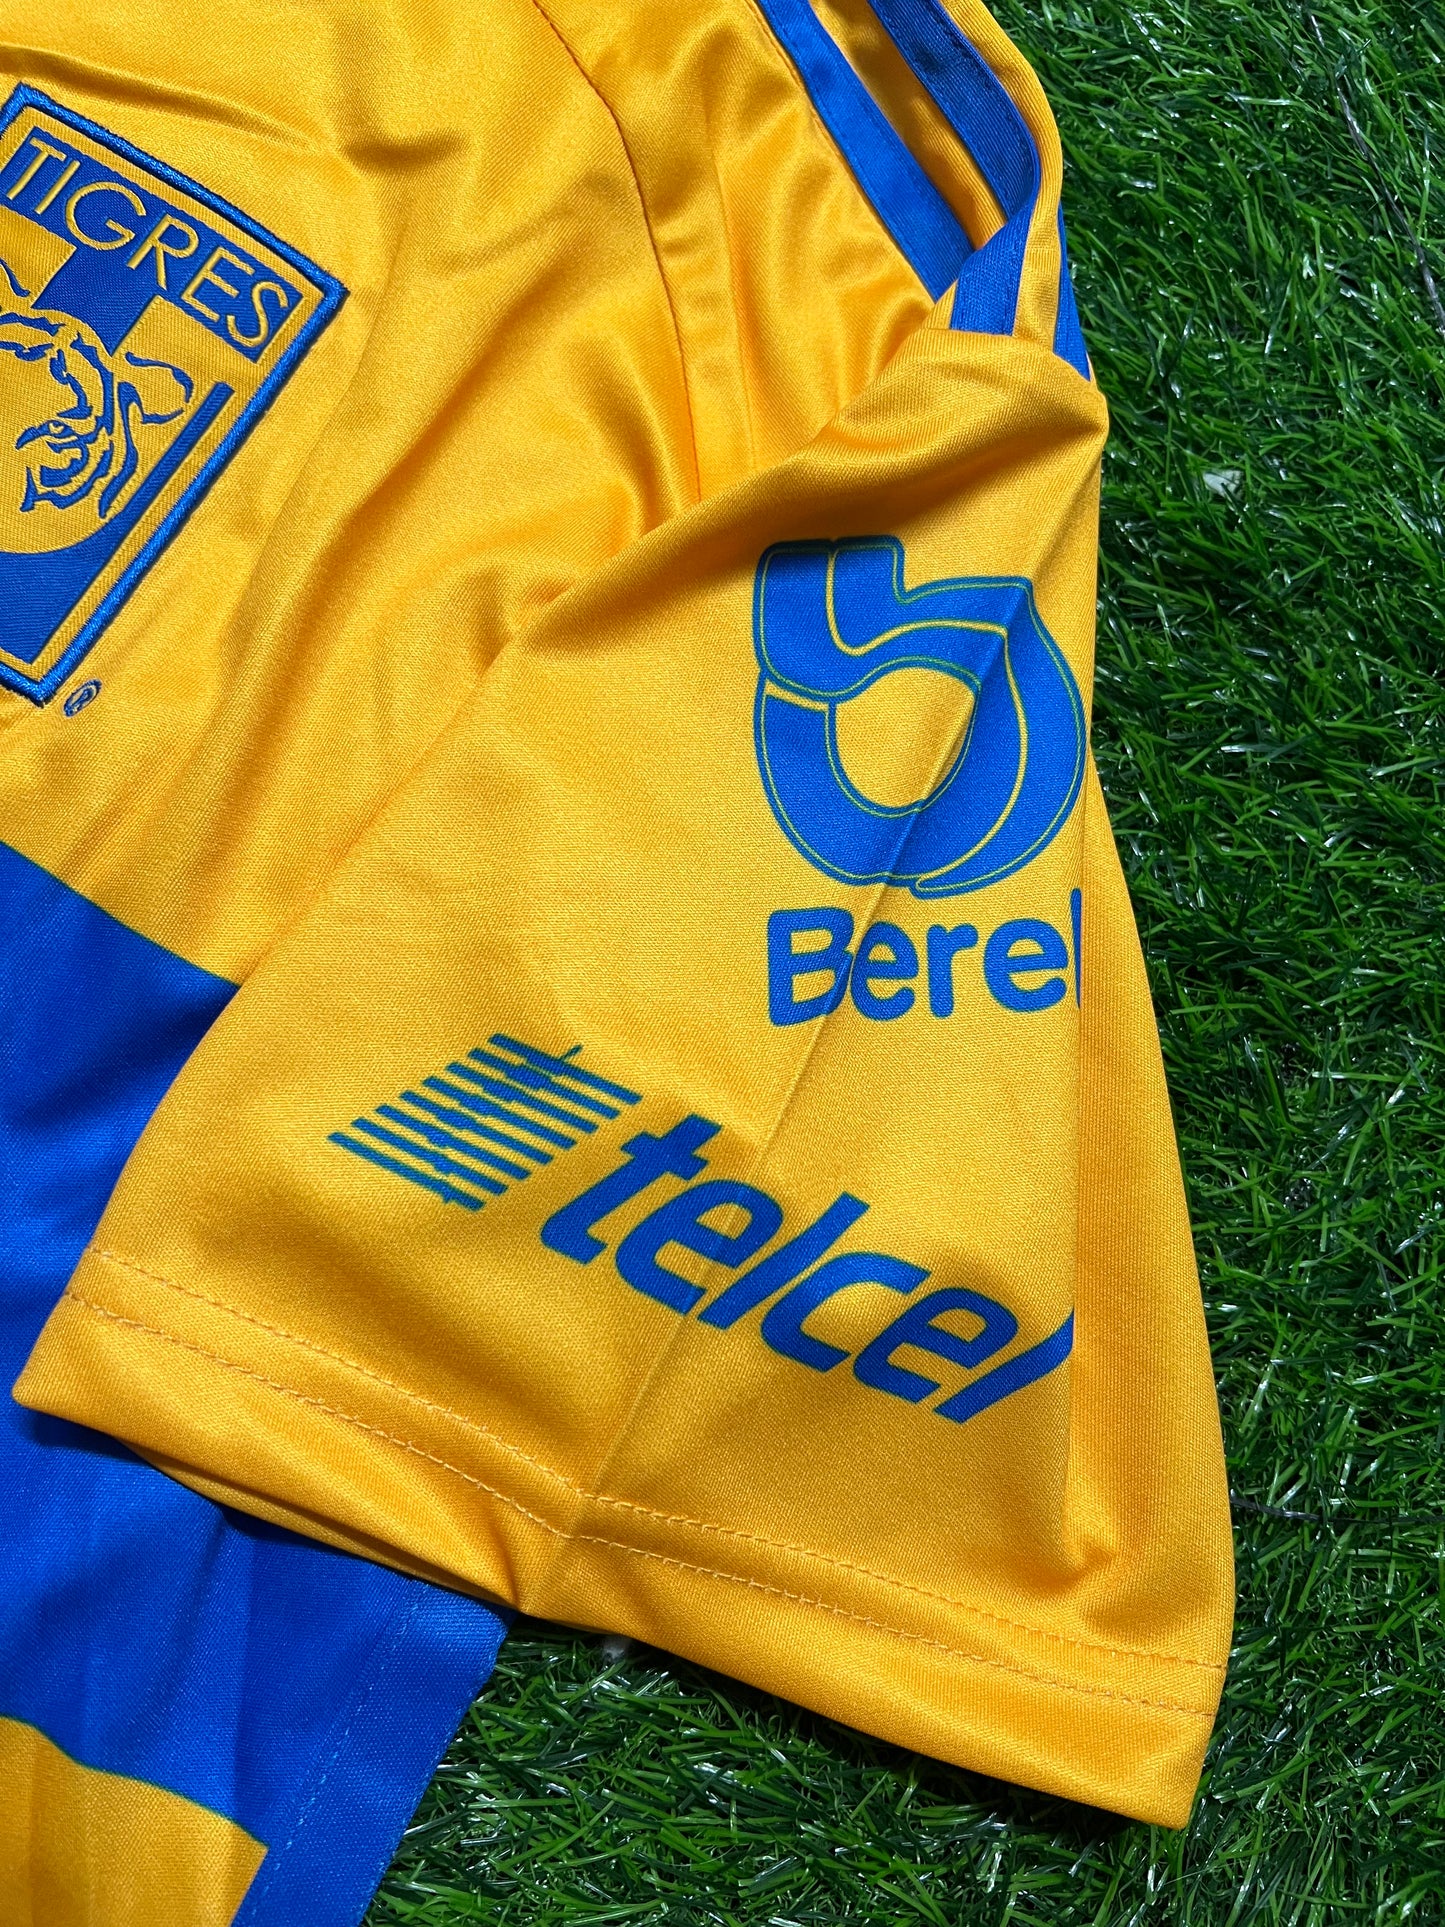 23/24 Tigres UANL Home Jersey | Size: L